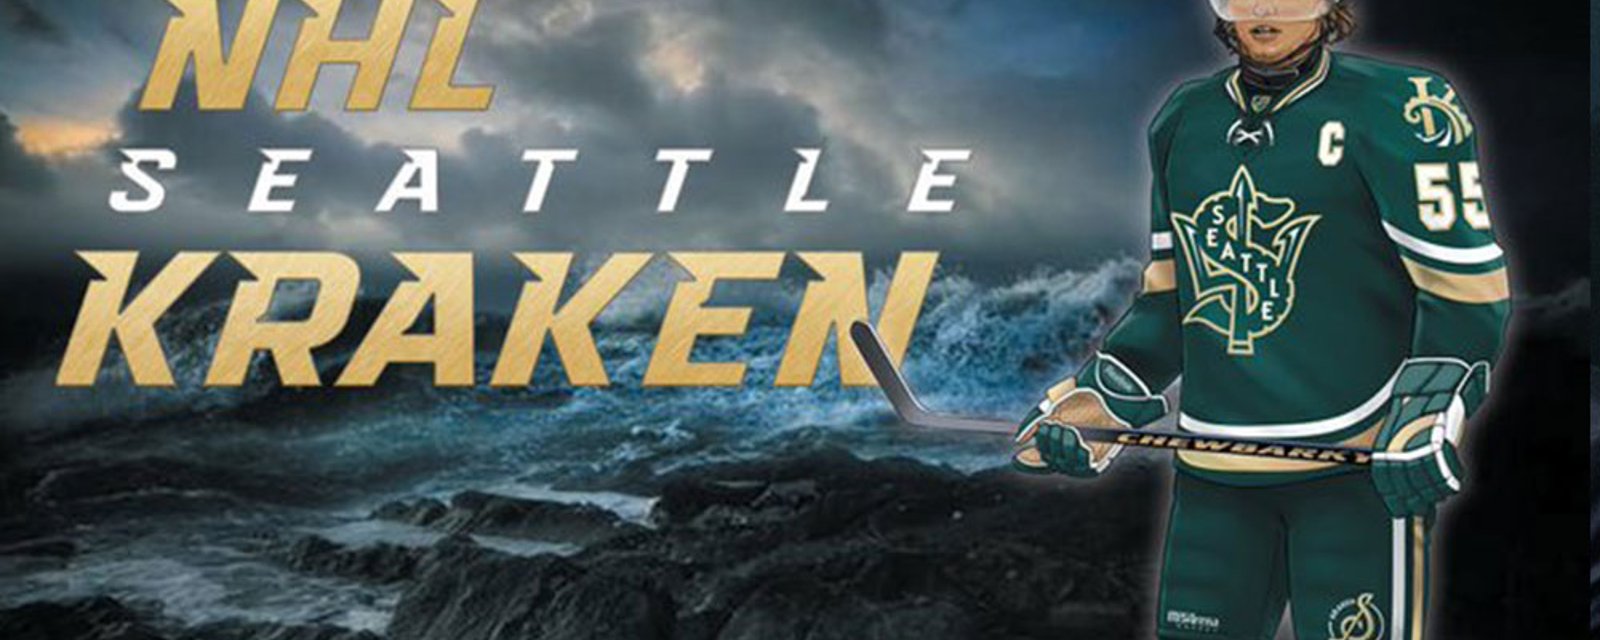 The NHL’s newest franchise will reportedly be named the Seattle Kraken.